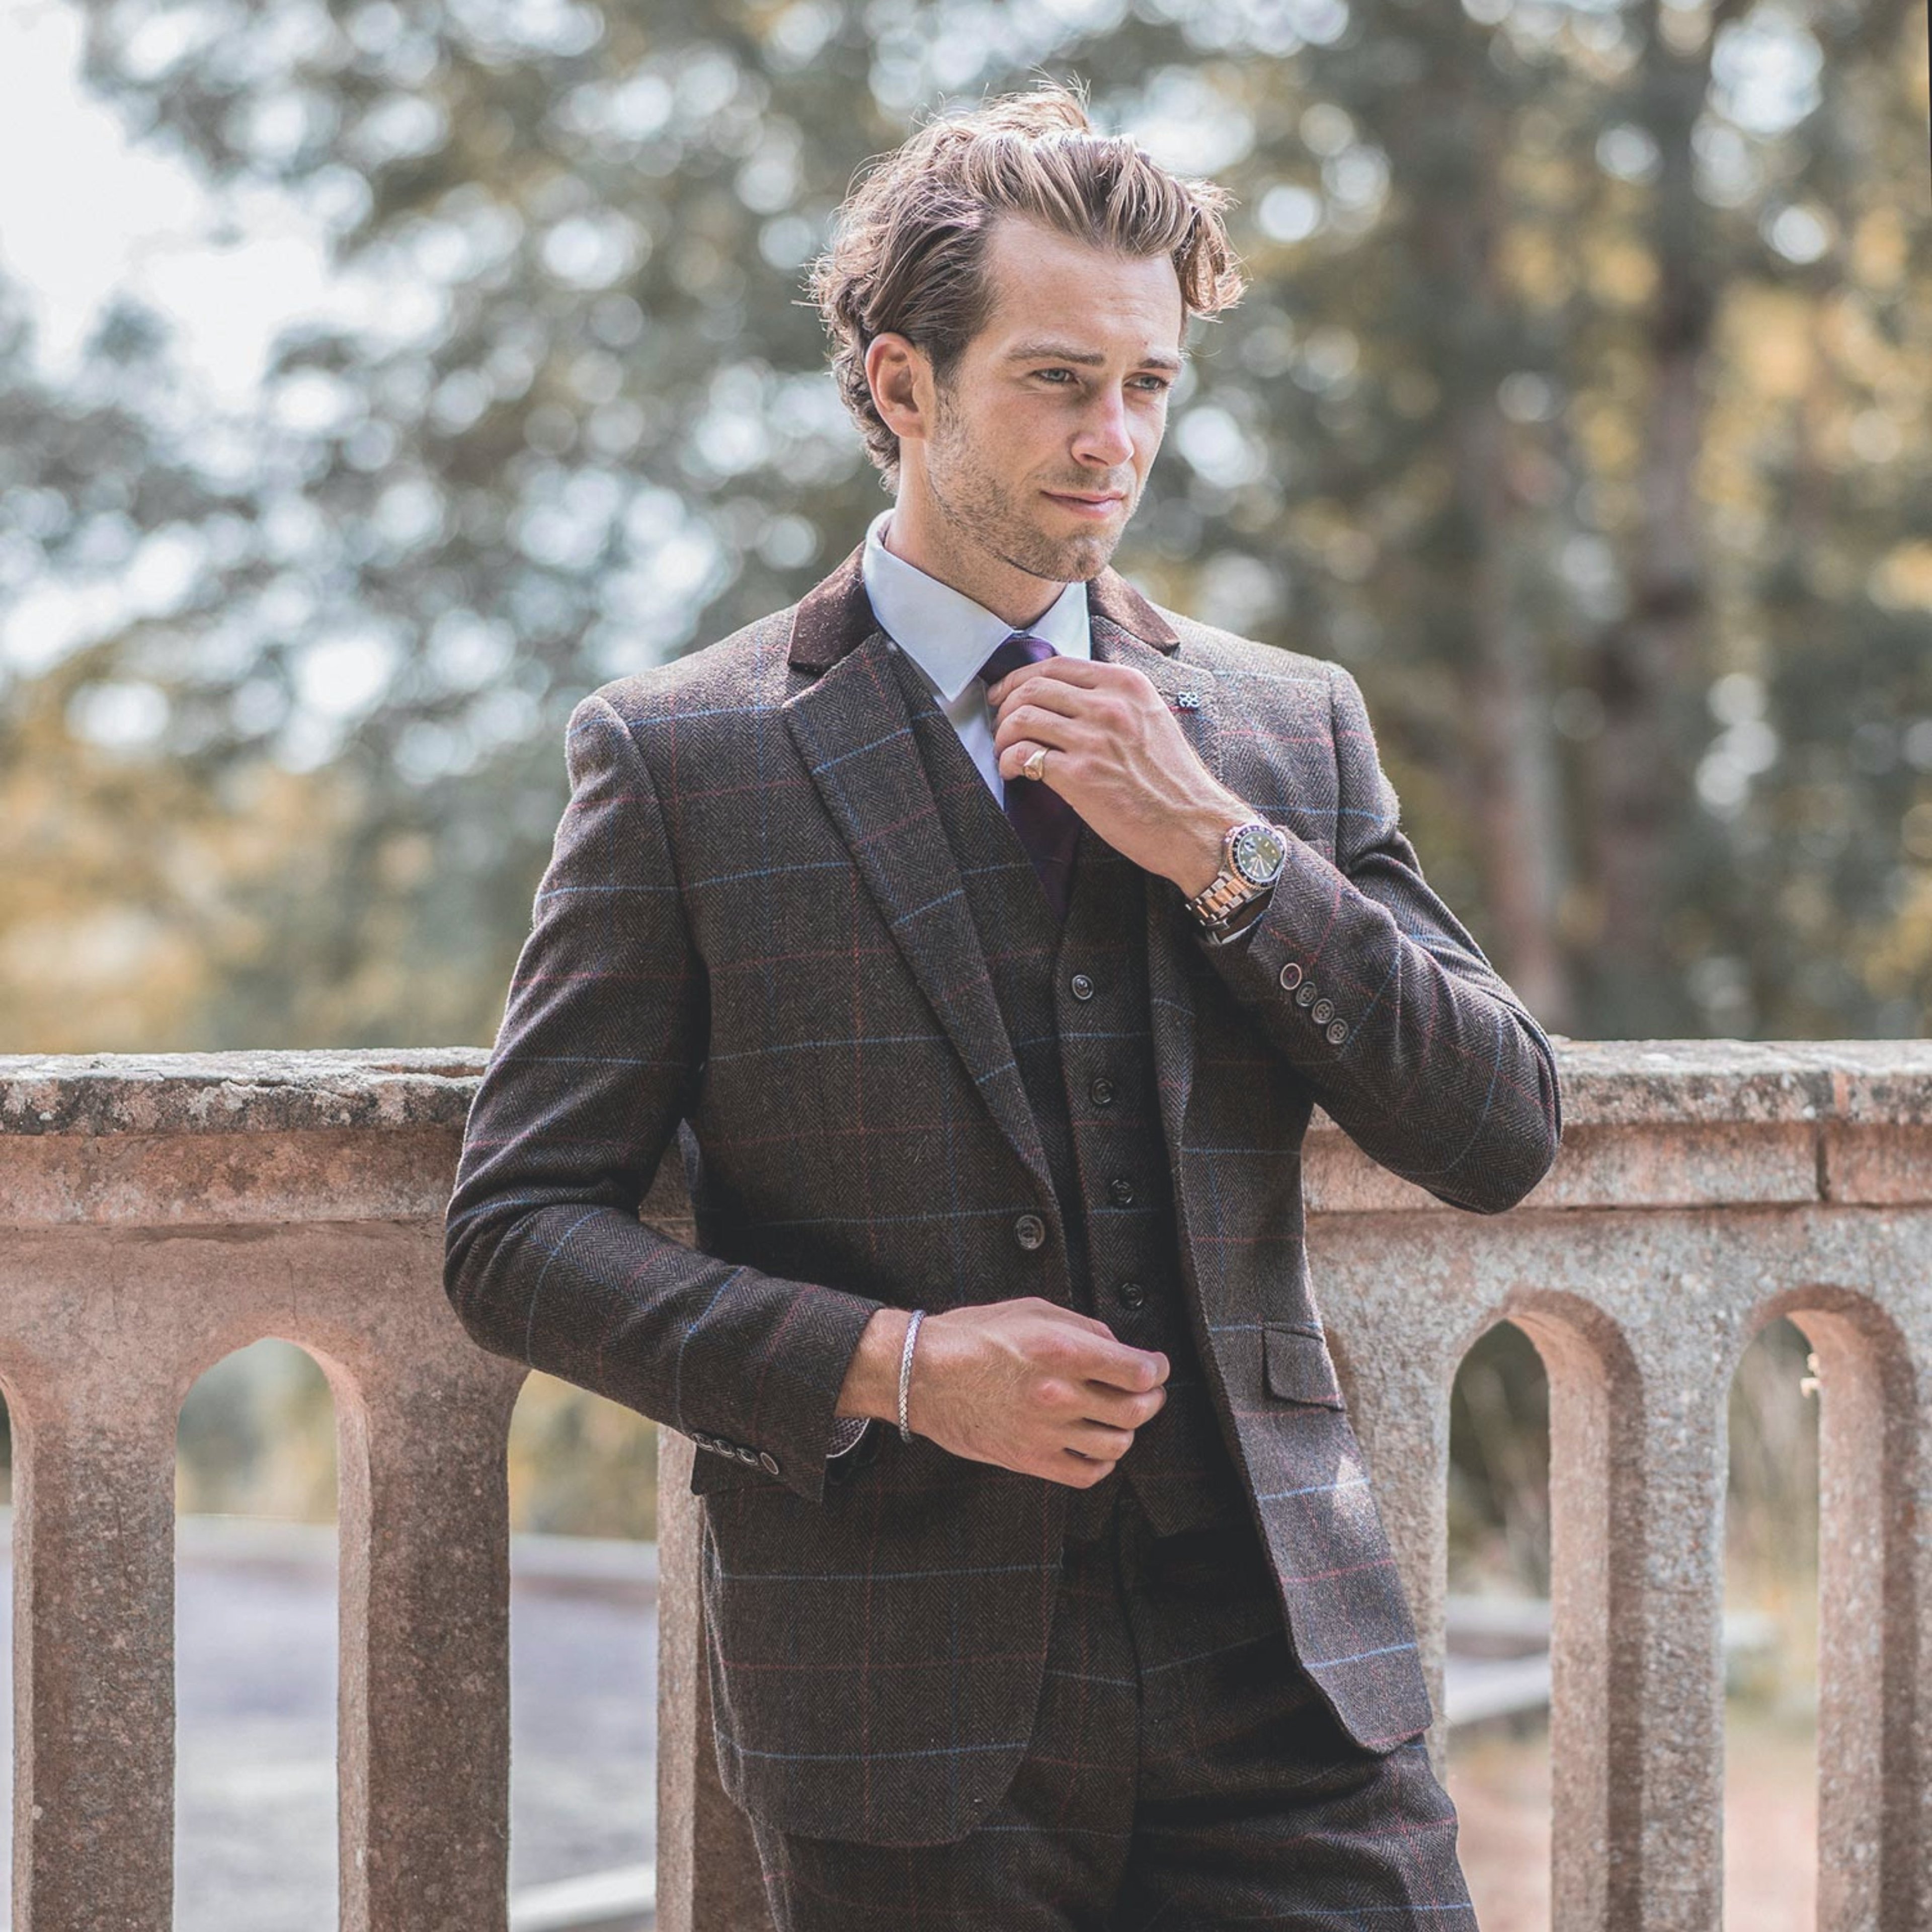 What Is a Three-Piece Suit and How Should I Wear It? – Flex Suits